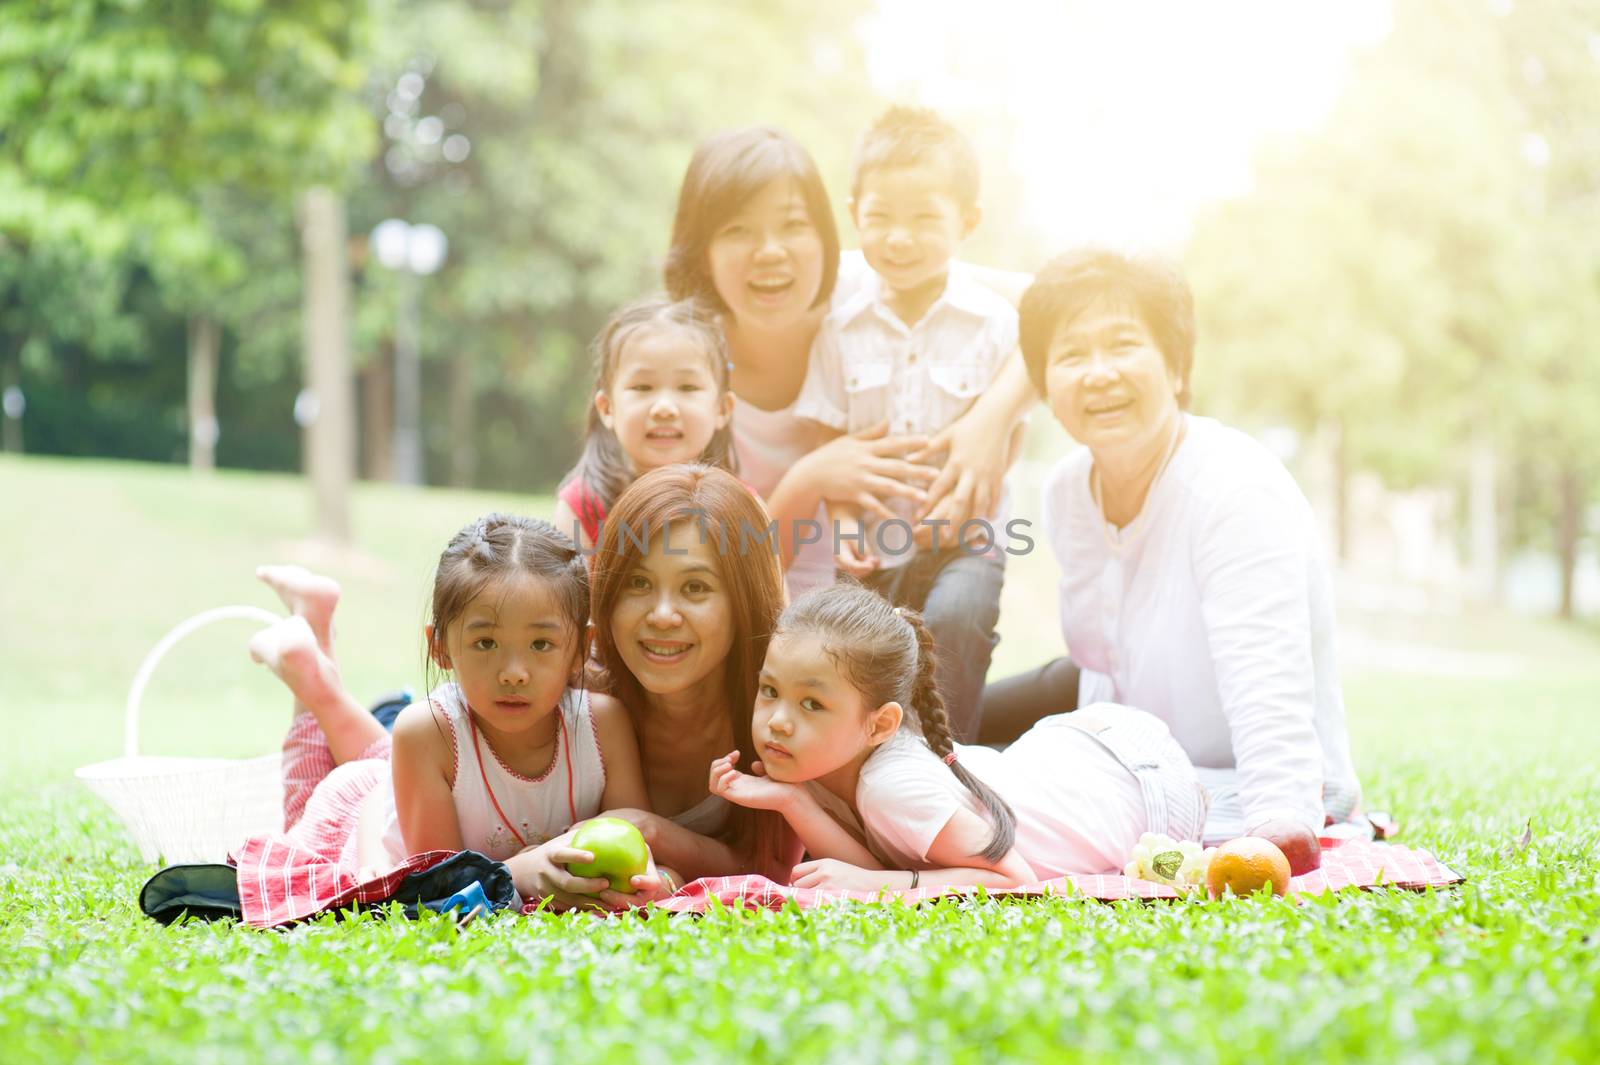 Asian multi generations family portrait, grandparent, parents and children, outdoor nature park in morning with sun flare.